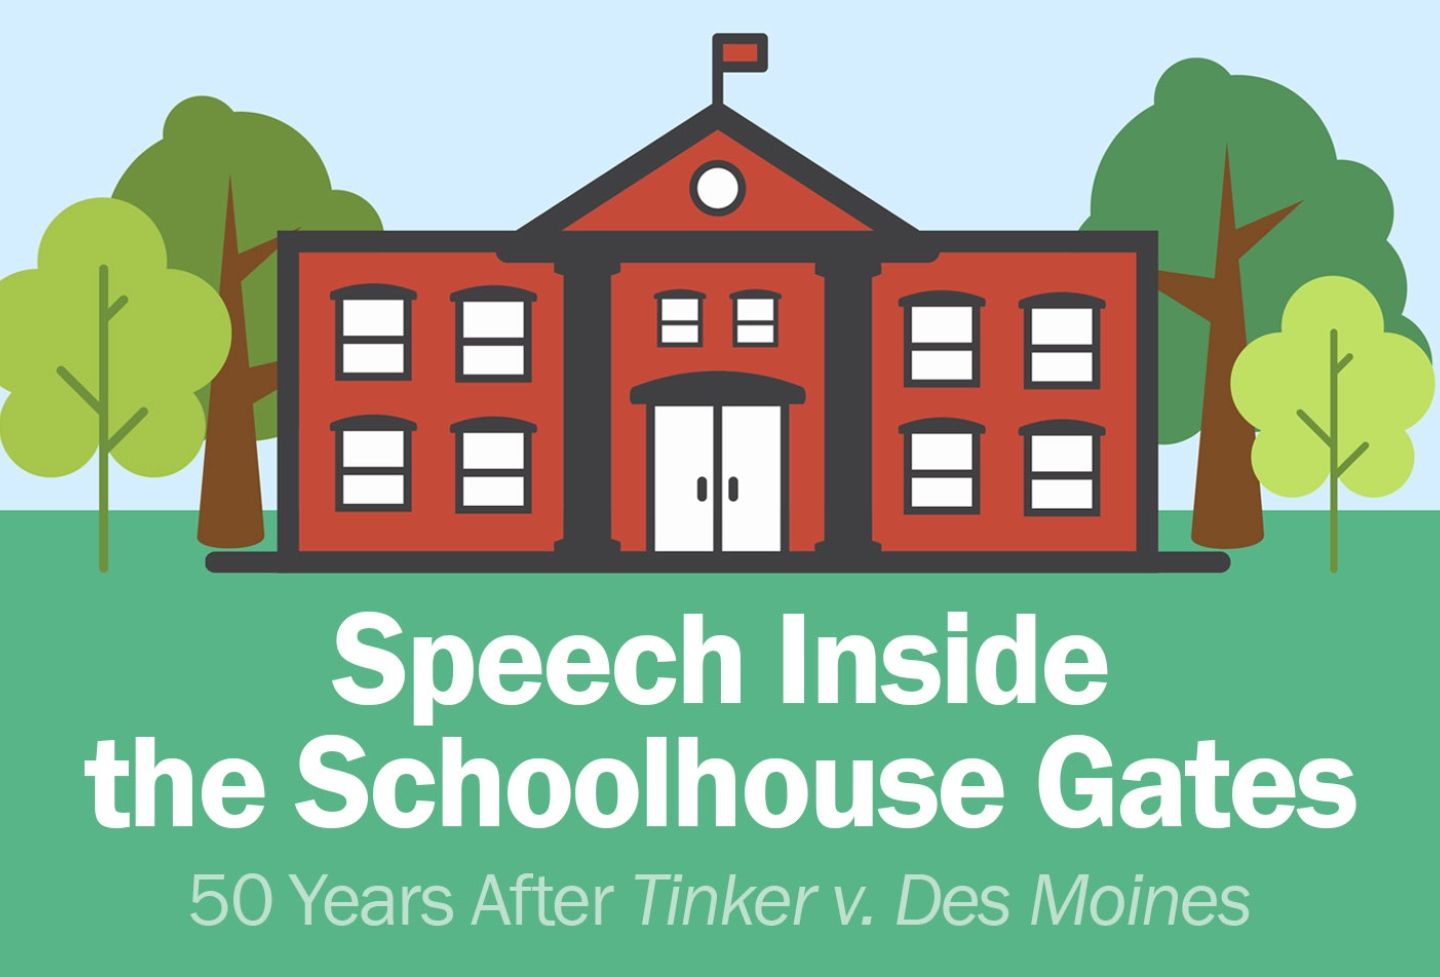 Speech Inside the Schoolhouse Gates: 50 Years After Tinker v. Des Moines